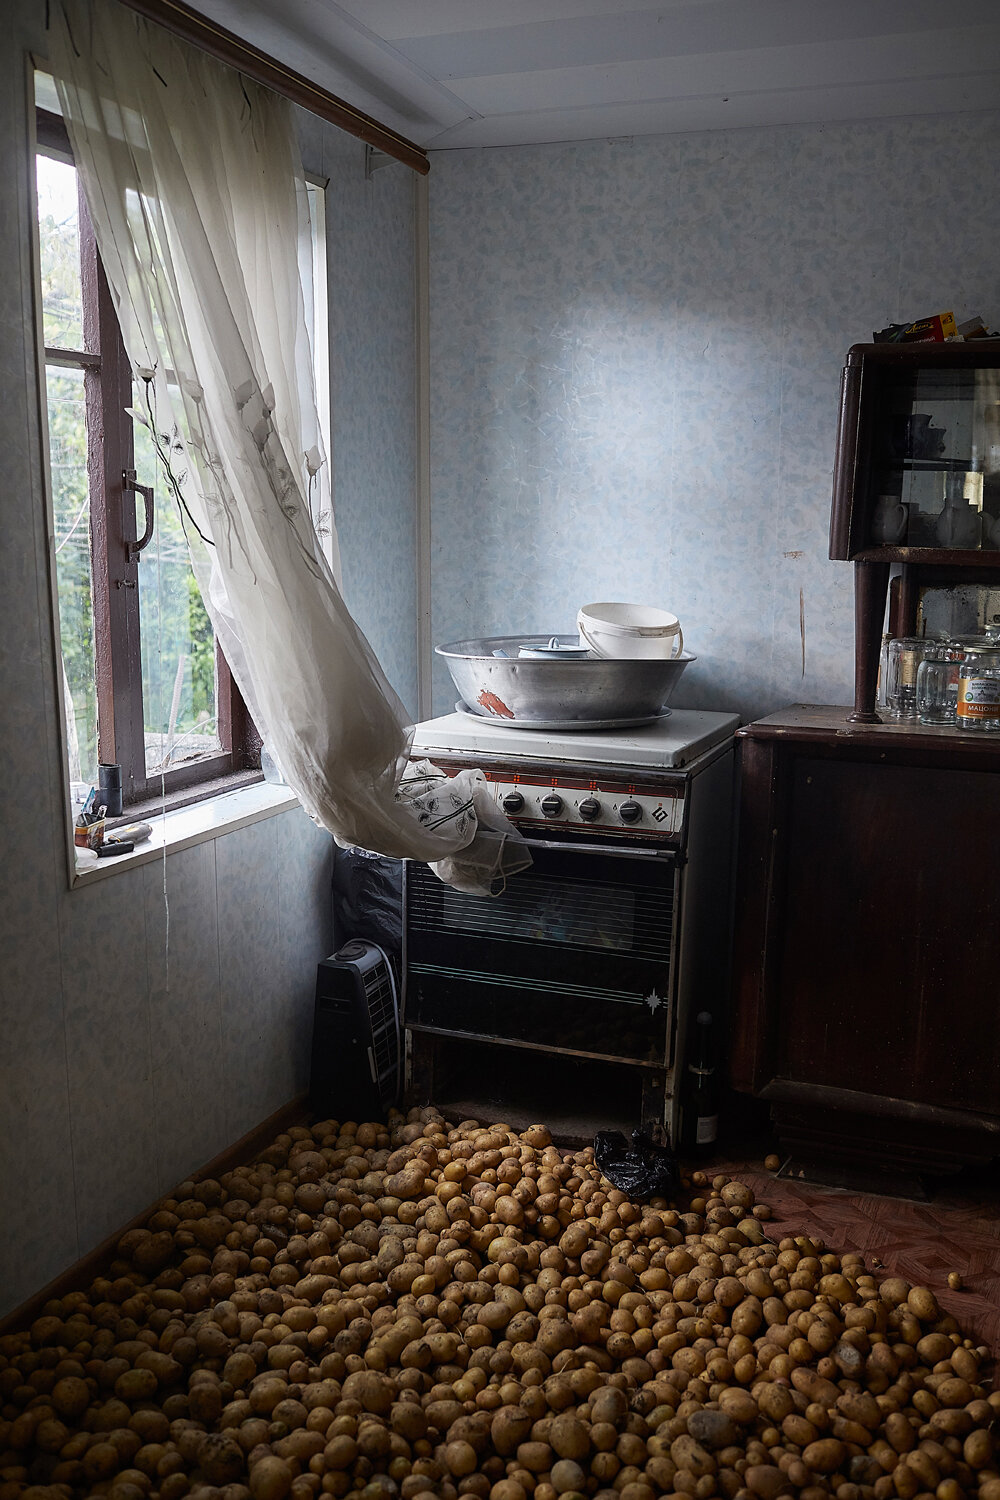  Abkhazia, Eshera, 07/07/2017. Potatoes are stored on a floor in order for them to stay dry. 